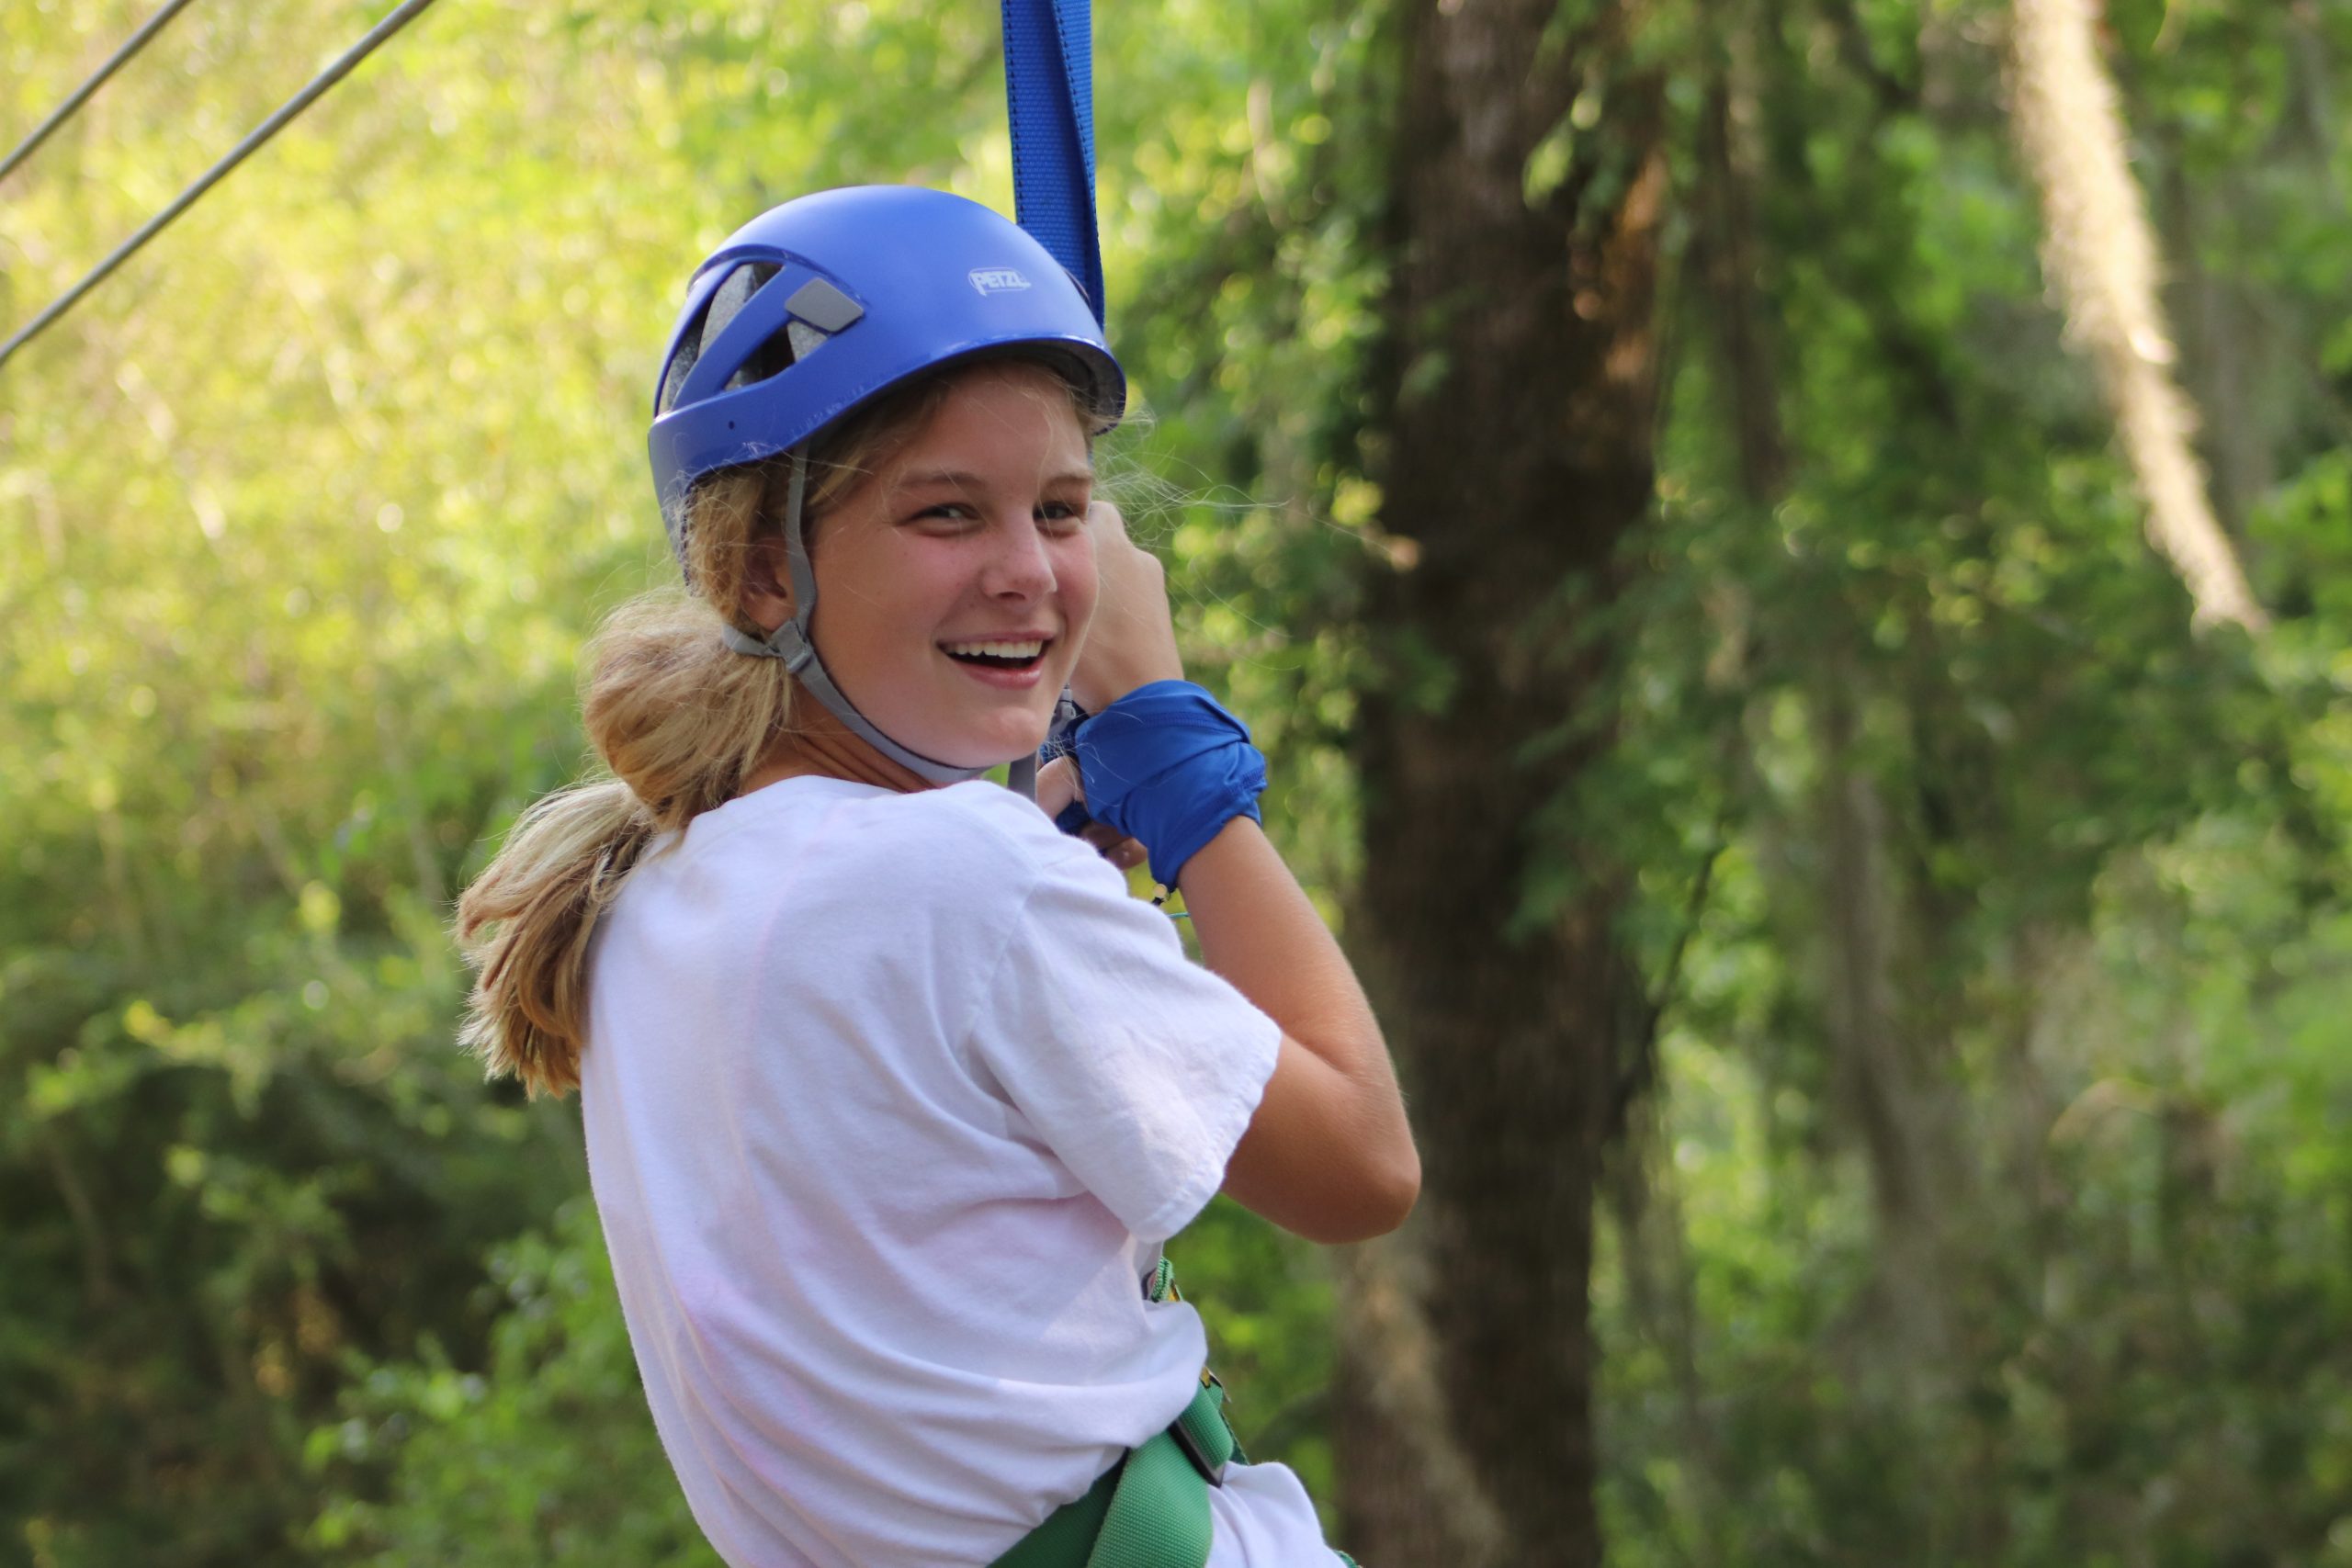 girl with helmet hangs from rope on ropes course